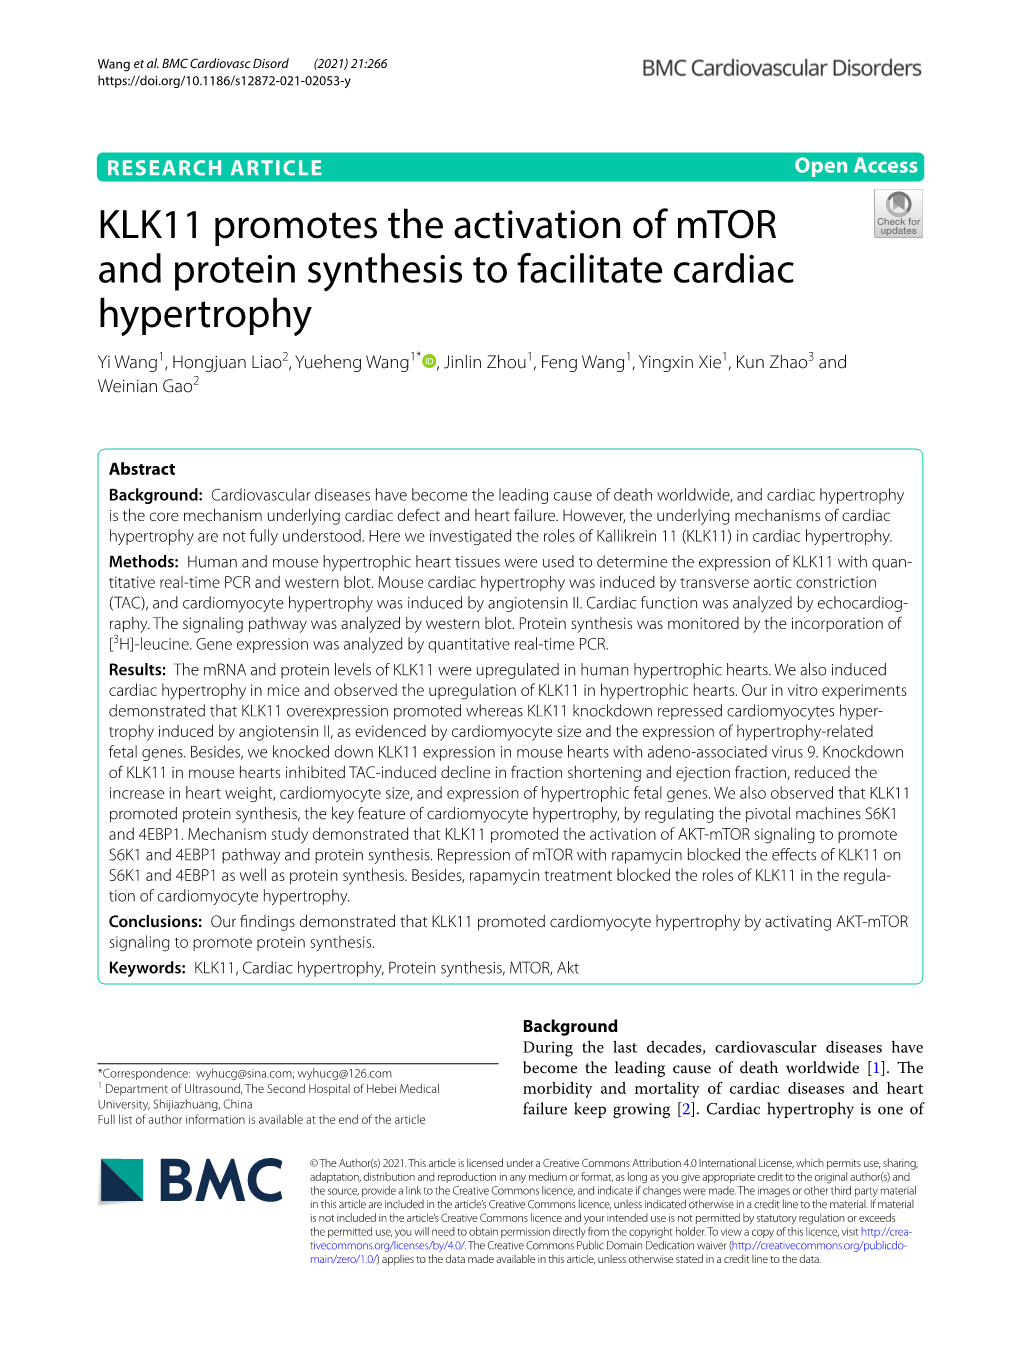 KLK11 Promotes the Activation of Mtor and Protein Synthesis To